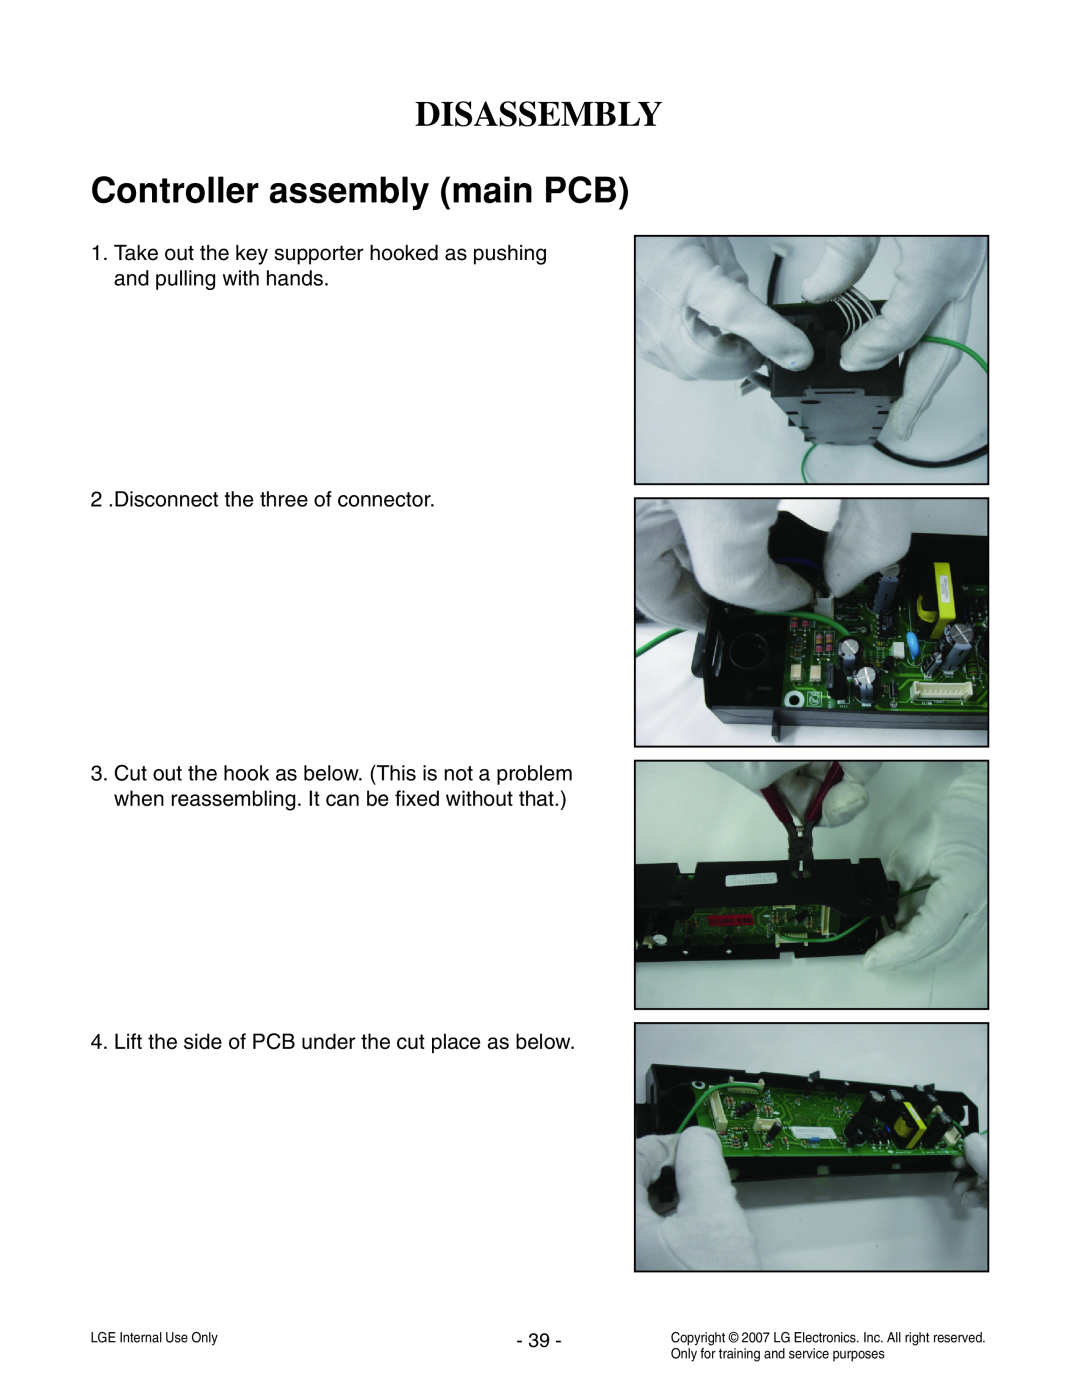 LG Electronics LCE30845 service manual Controller assembly main PCB, Disassembly 